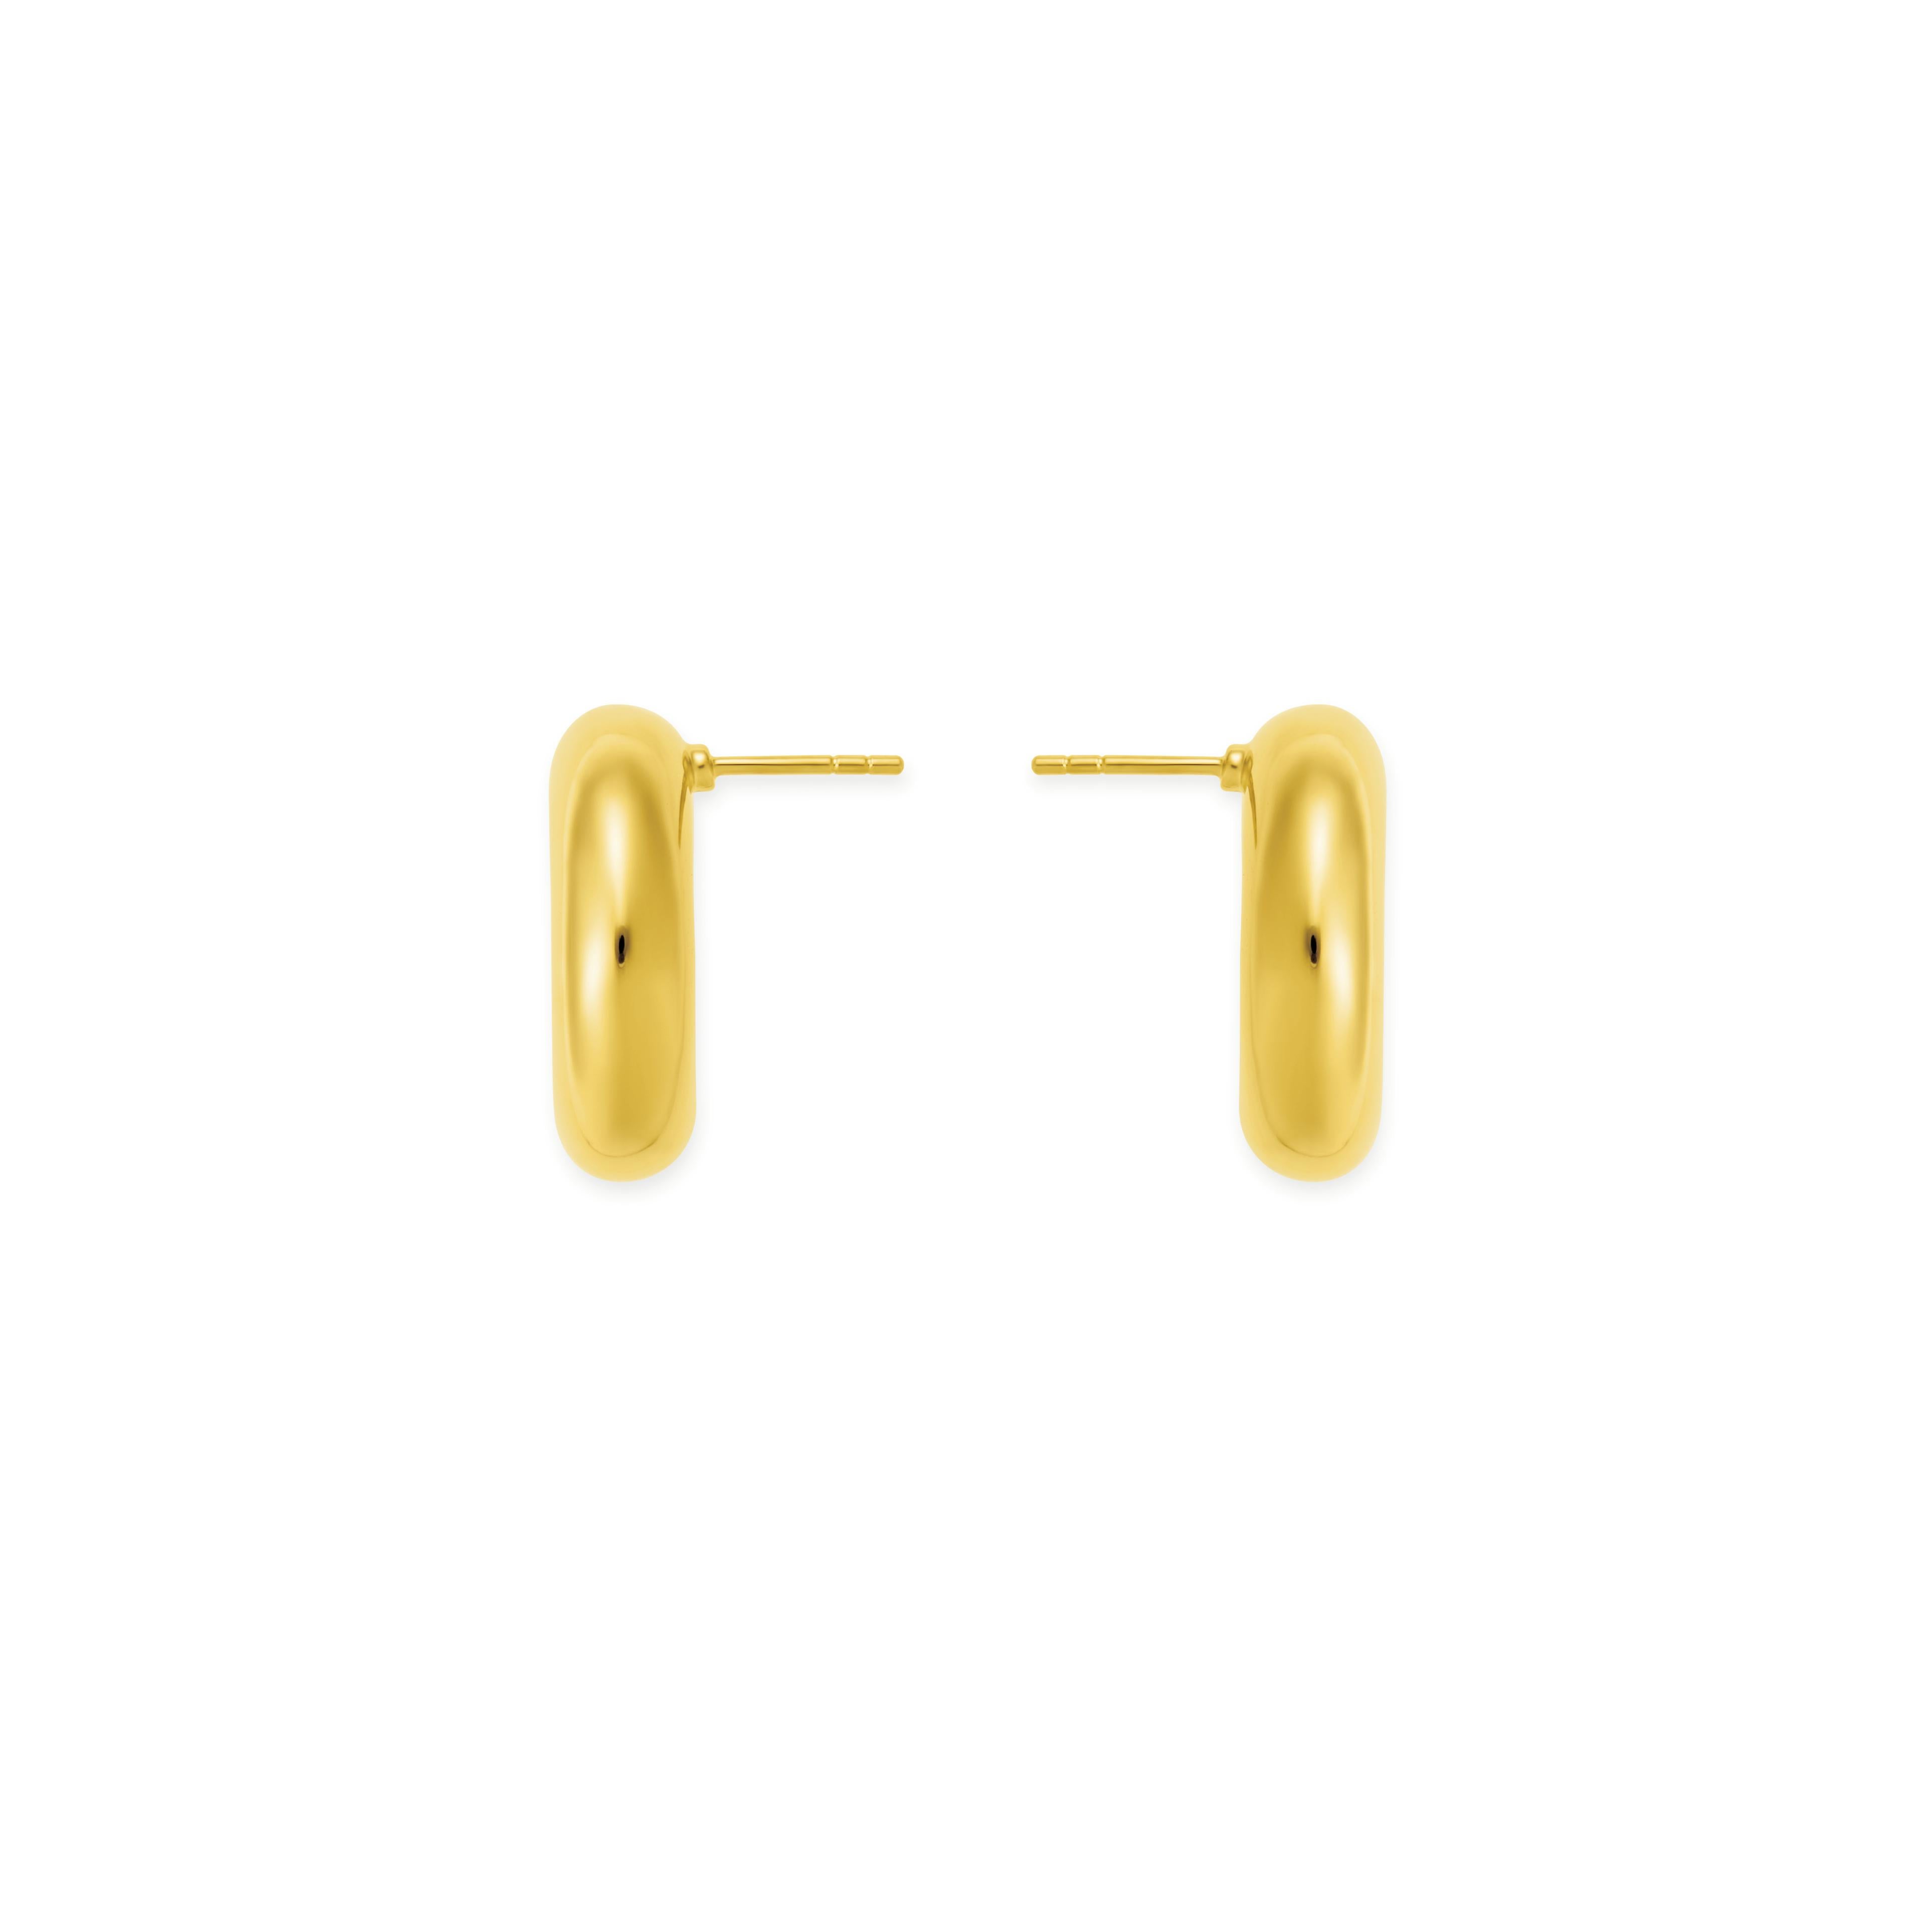 Mistova's Proton Earrings are a example of our craftmanship. Made from the finest 18K gold. These earrings are a perfectly shaped ring shape. Hollowed out to create volume but still remain comfortable to wear. Through a engineered process we have